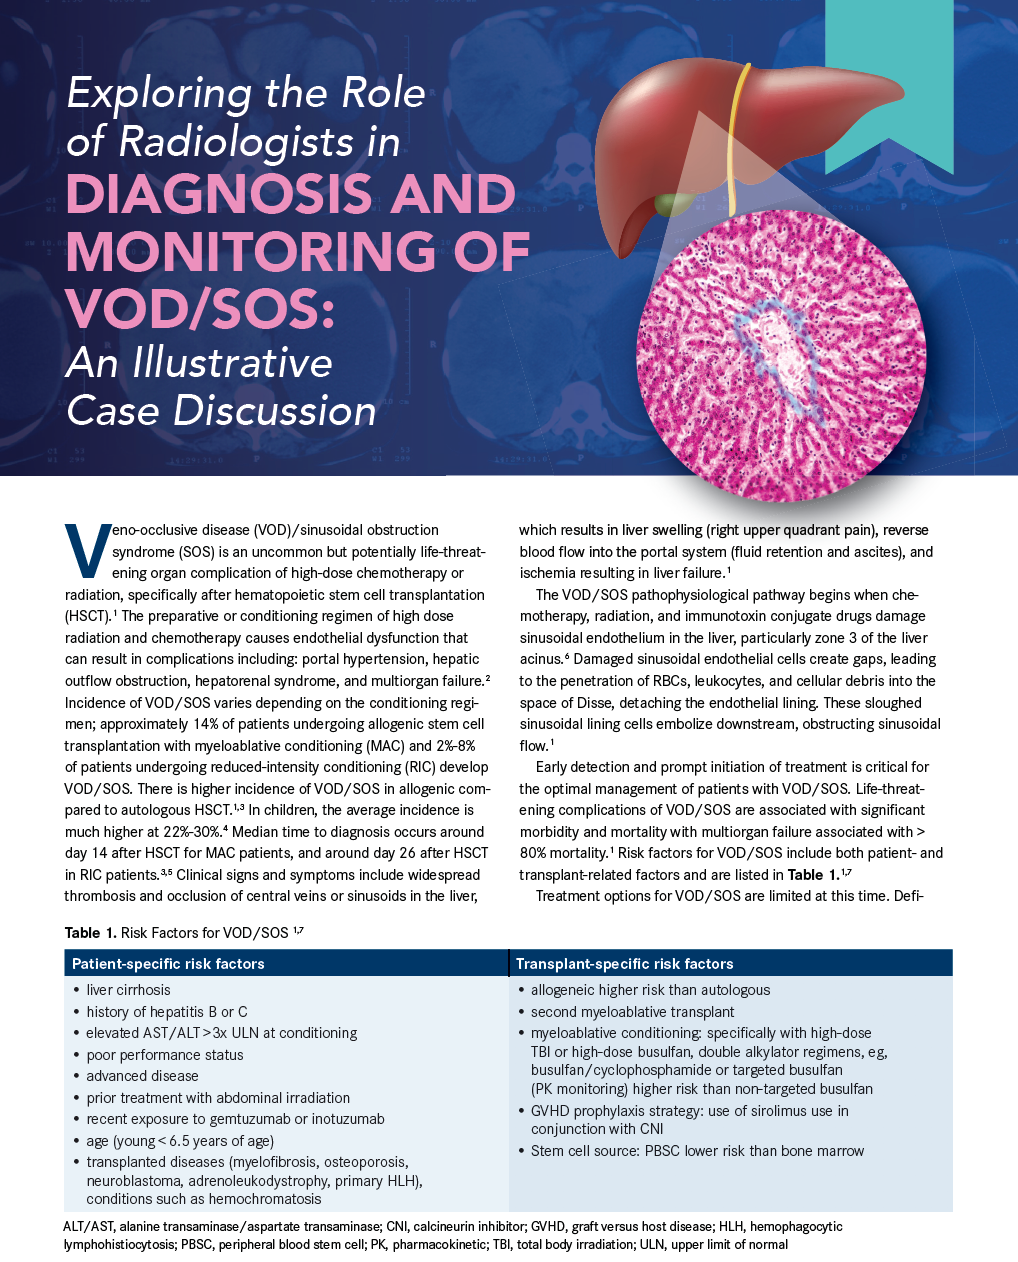 Exploring the Role of Radiologists in Diagnosis and Monitoring of VOD/SOS An Illustrative Case Discussion